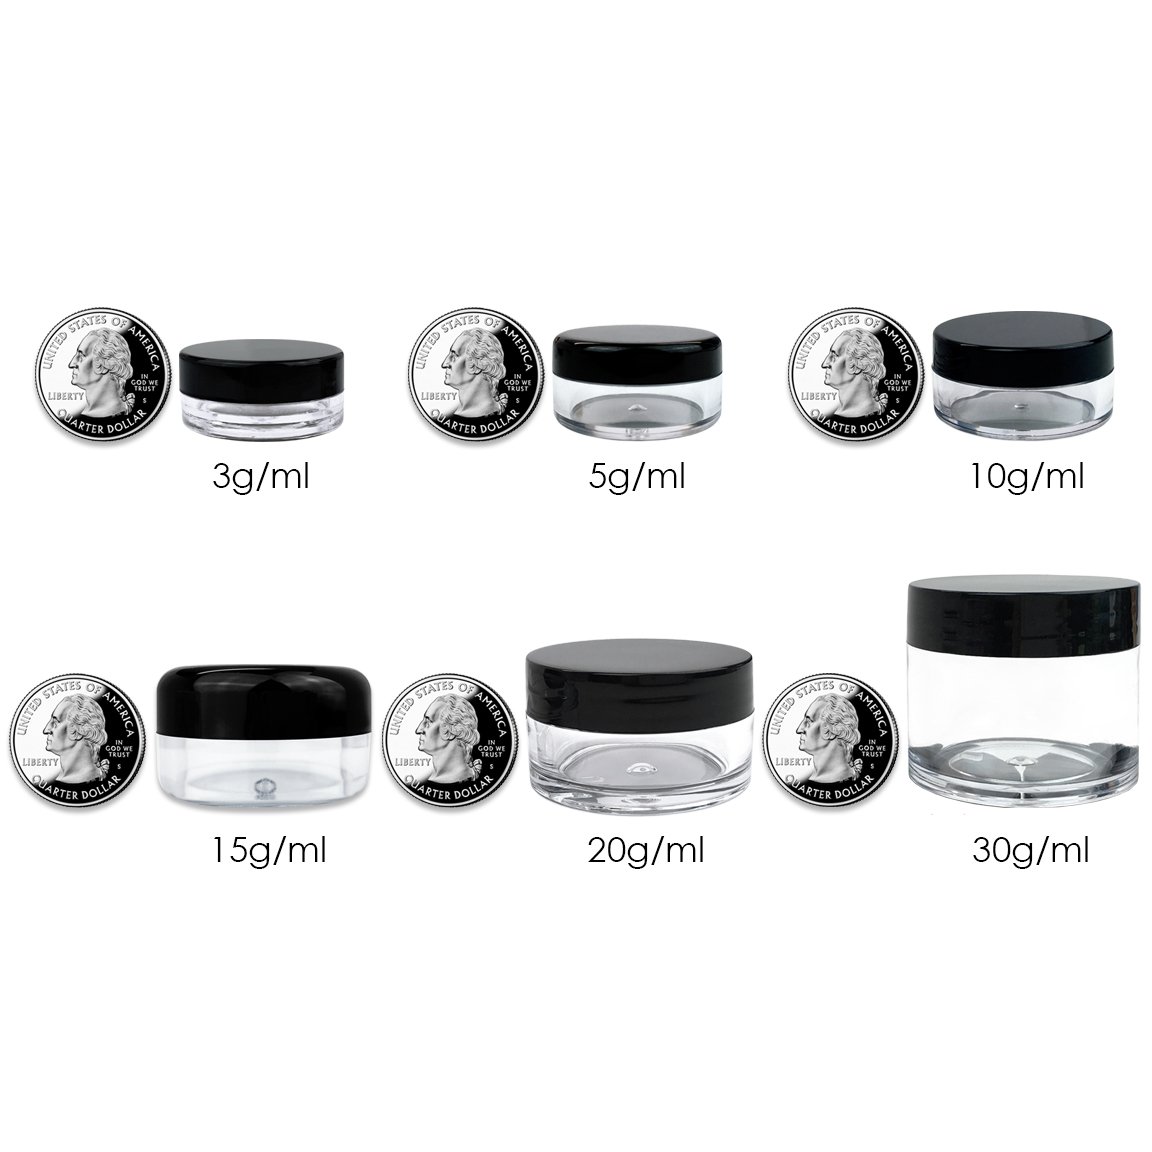 (Quantity: 100 Pieces) Beauticom 5G/5ML Round Clear Jars with White Lids for Acrylic Powder, Rhinestones, Charms and Other Nail Accessories